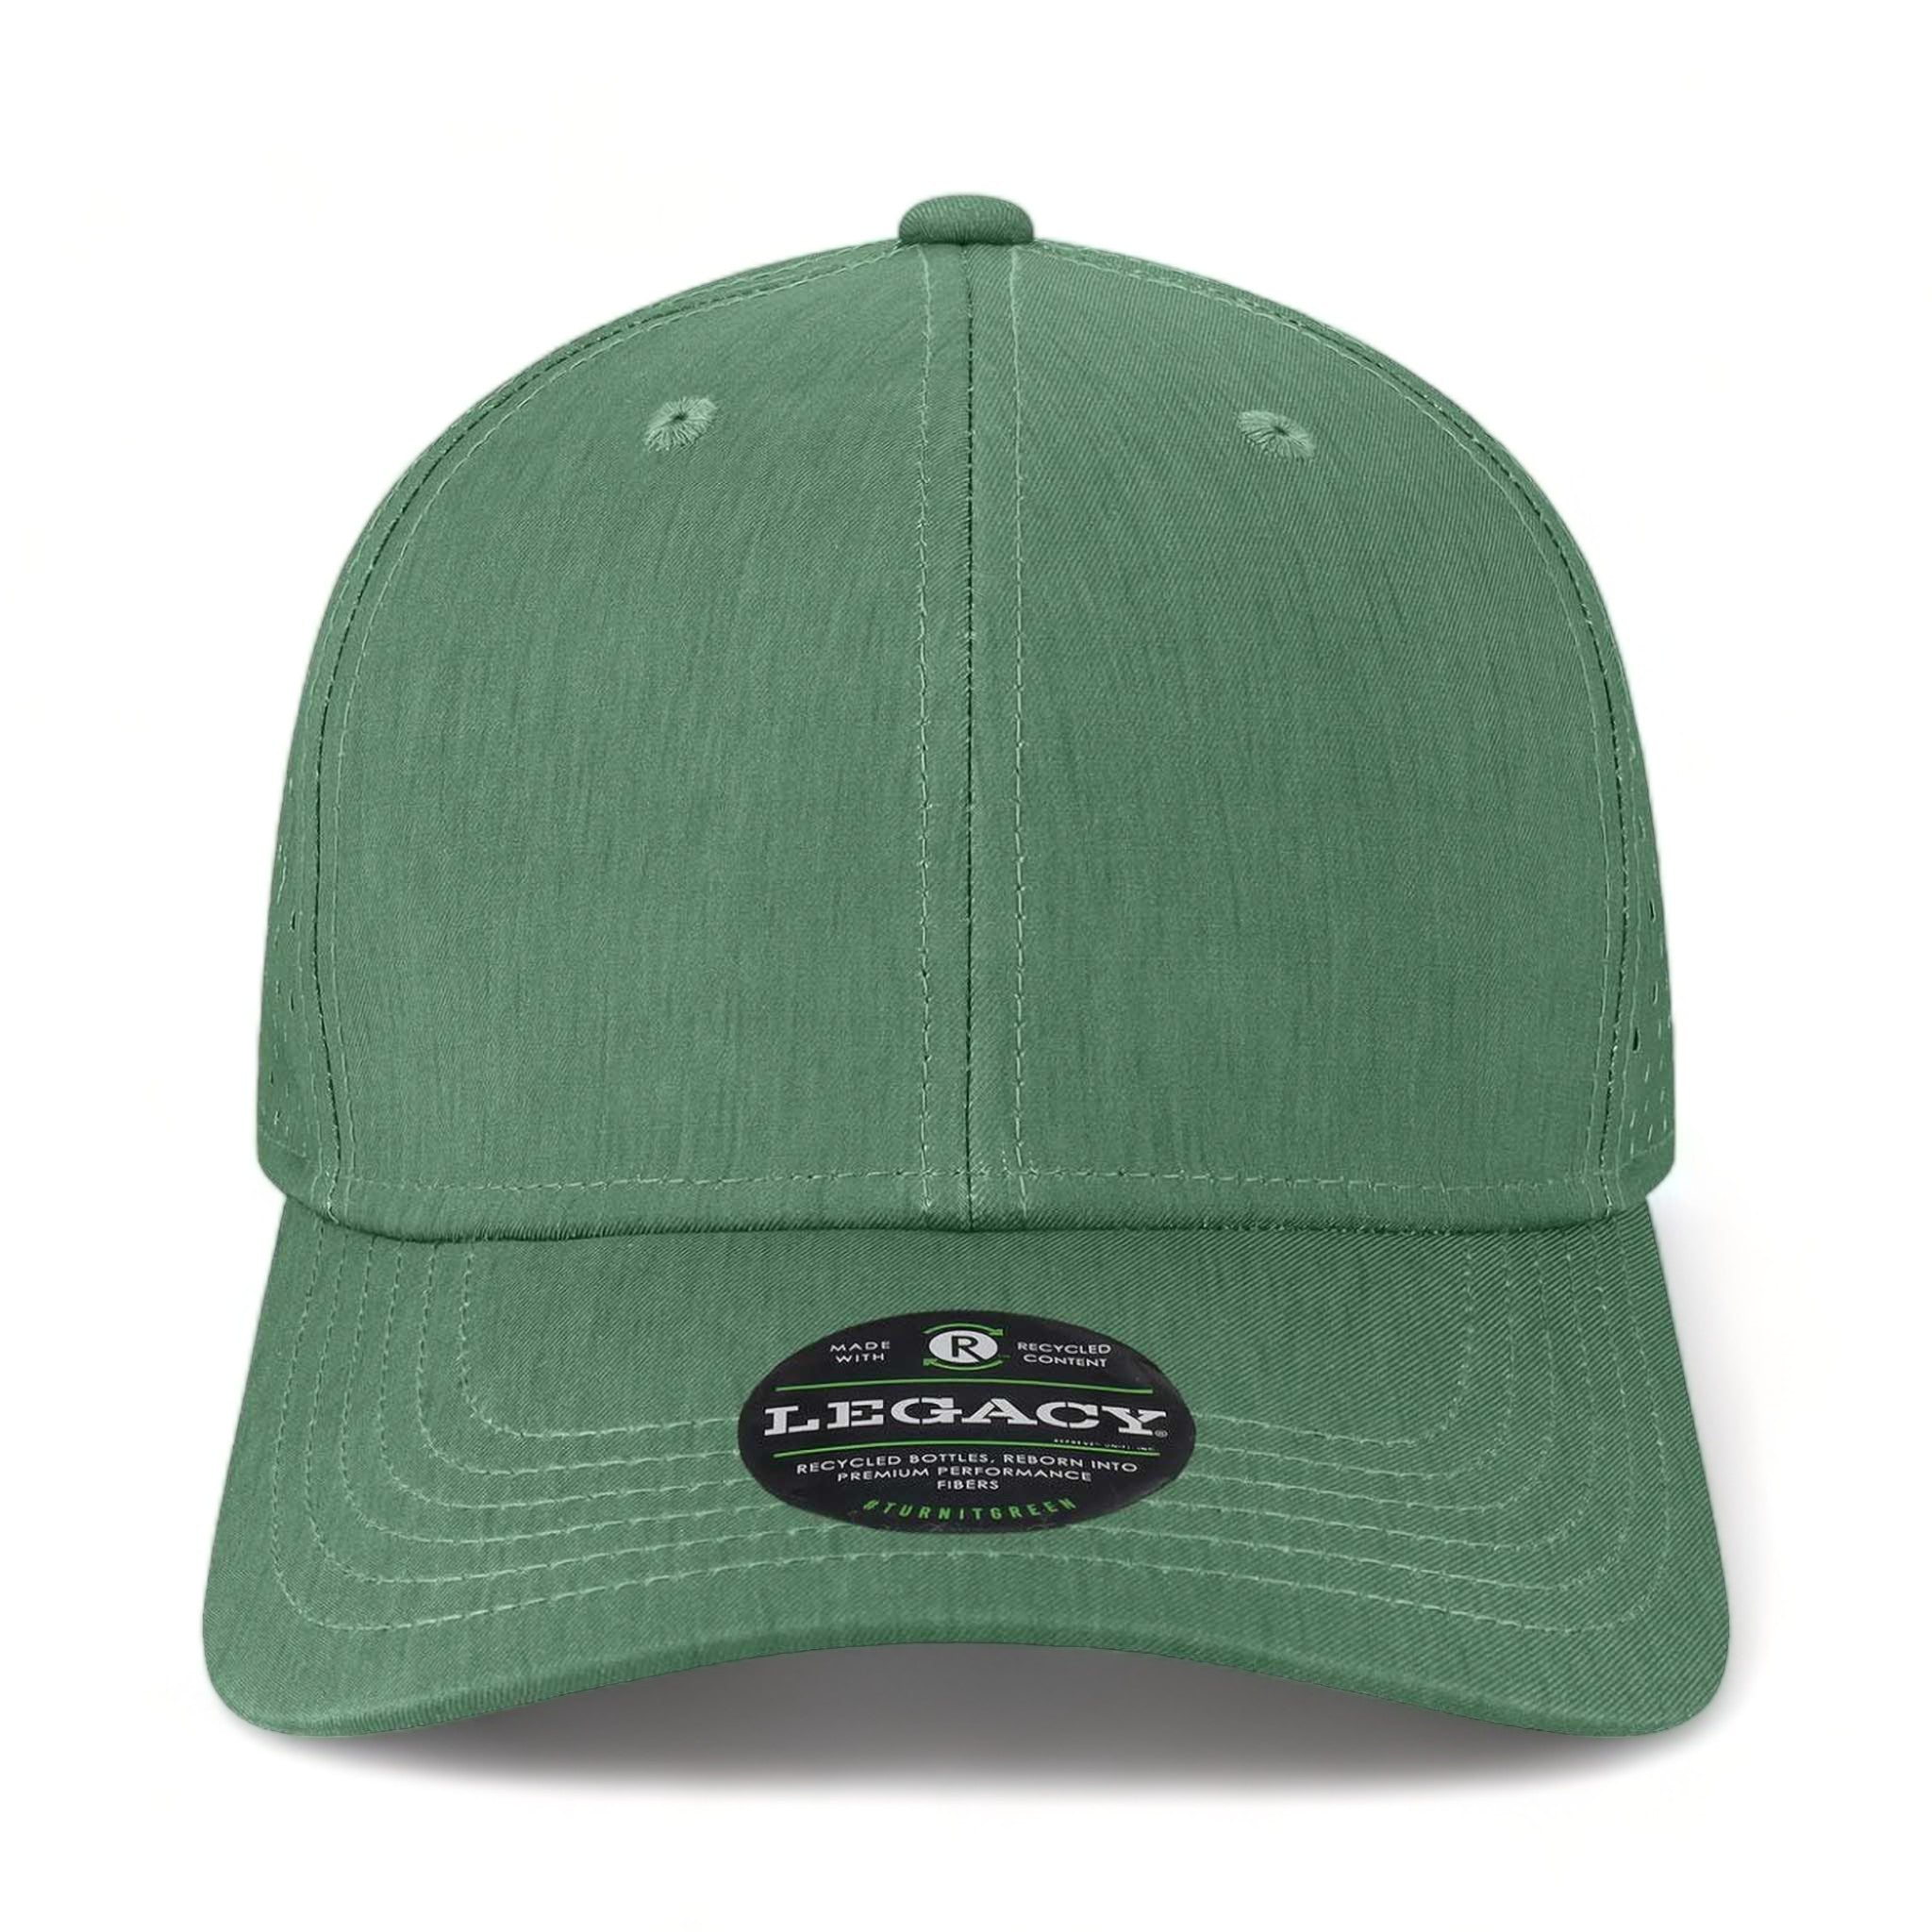 Front view of LEGACY REMPA custom hat in eco dark green